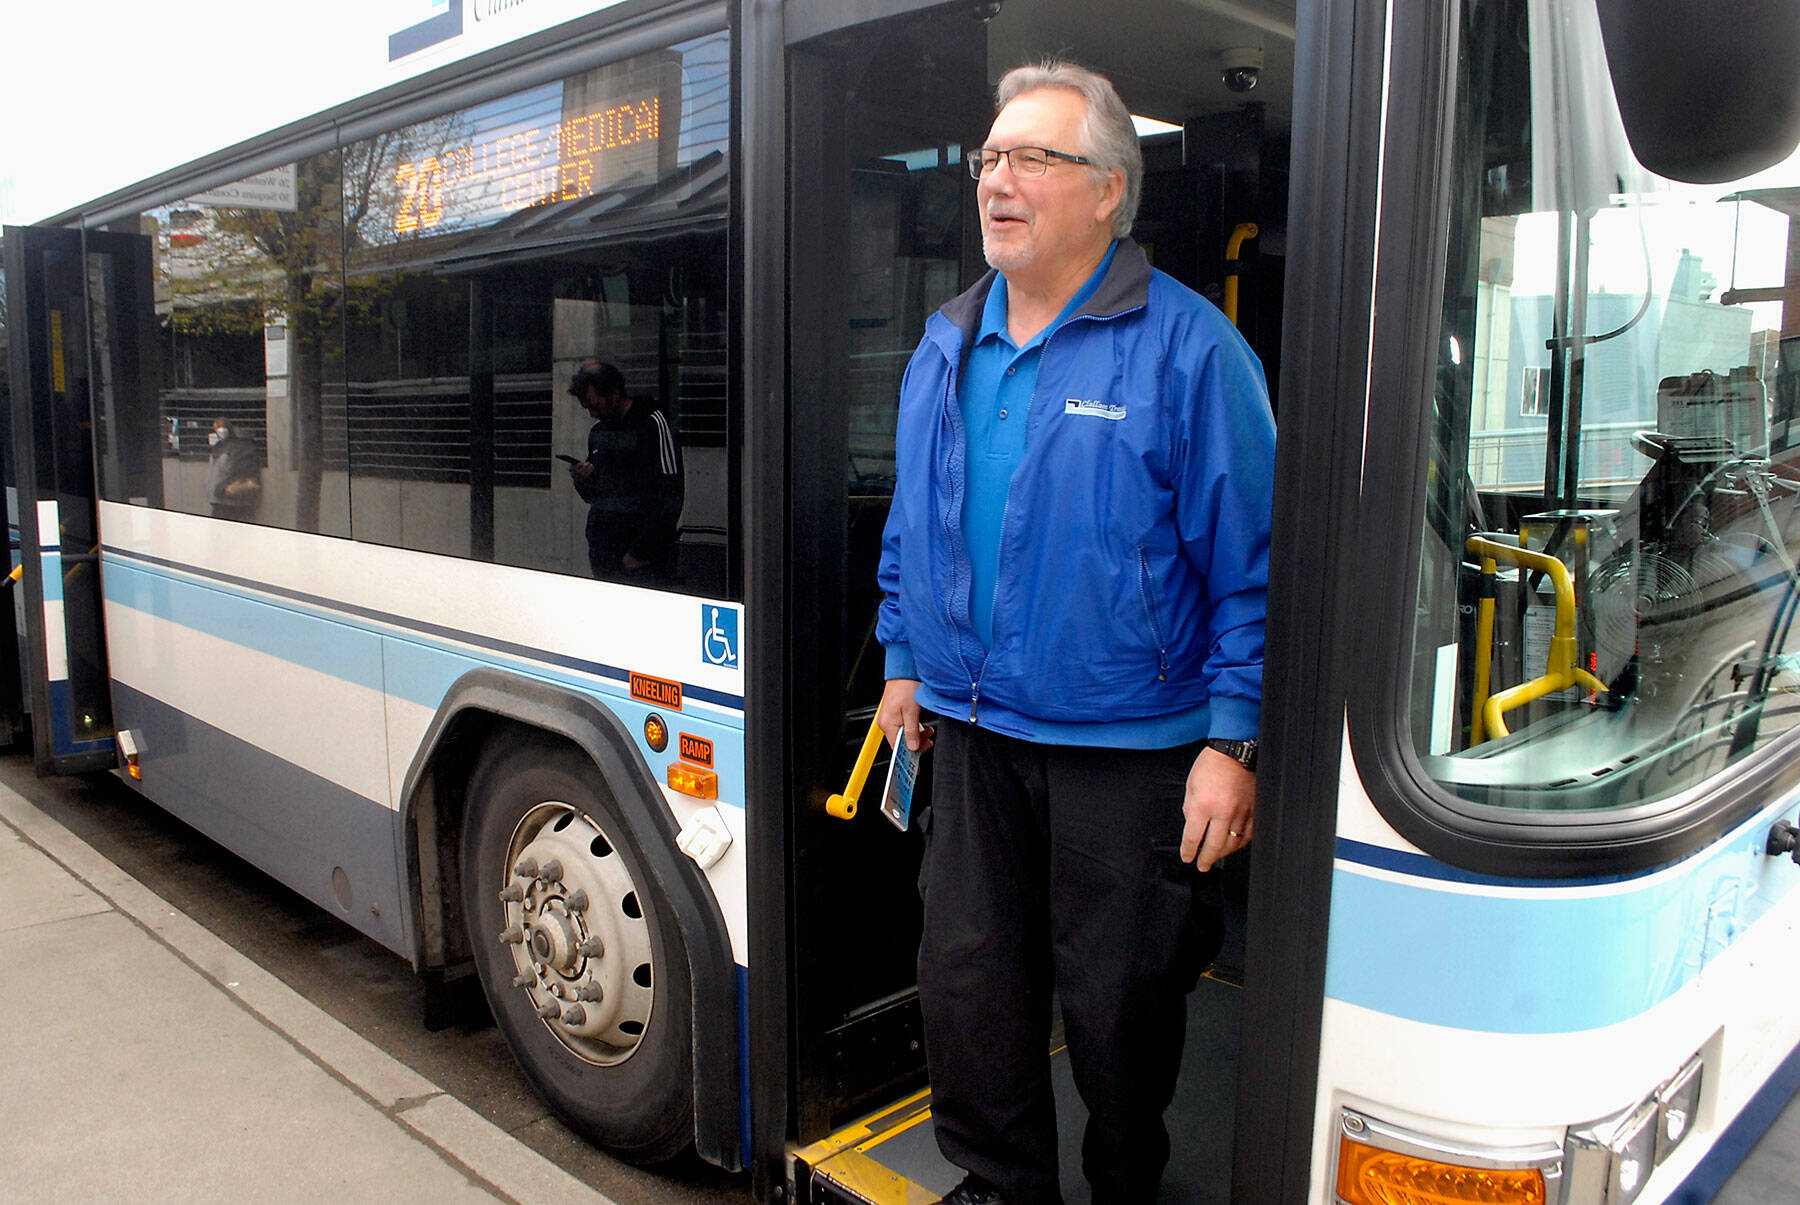 Clallam Transit driver Joe Sutton steps off his bus without a mask after arriving at The Gateway transit center in downtown Port Angeles on Tuesday. (Keith Thorpe/Peninsula Daily News)